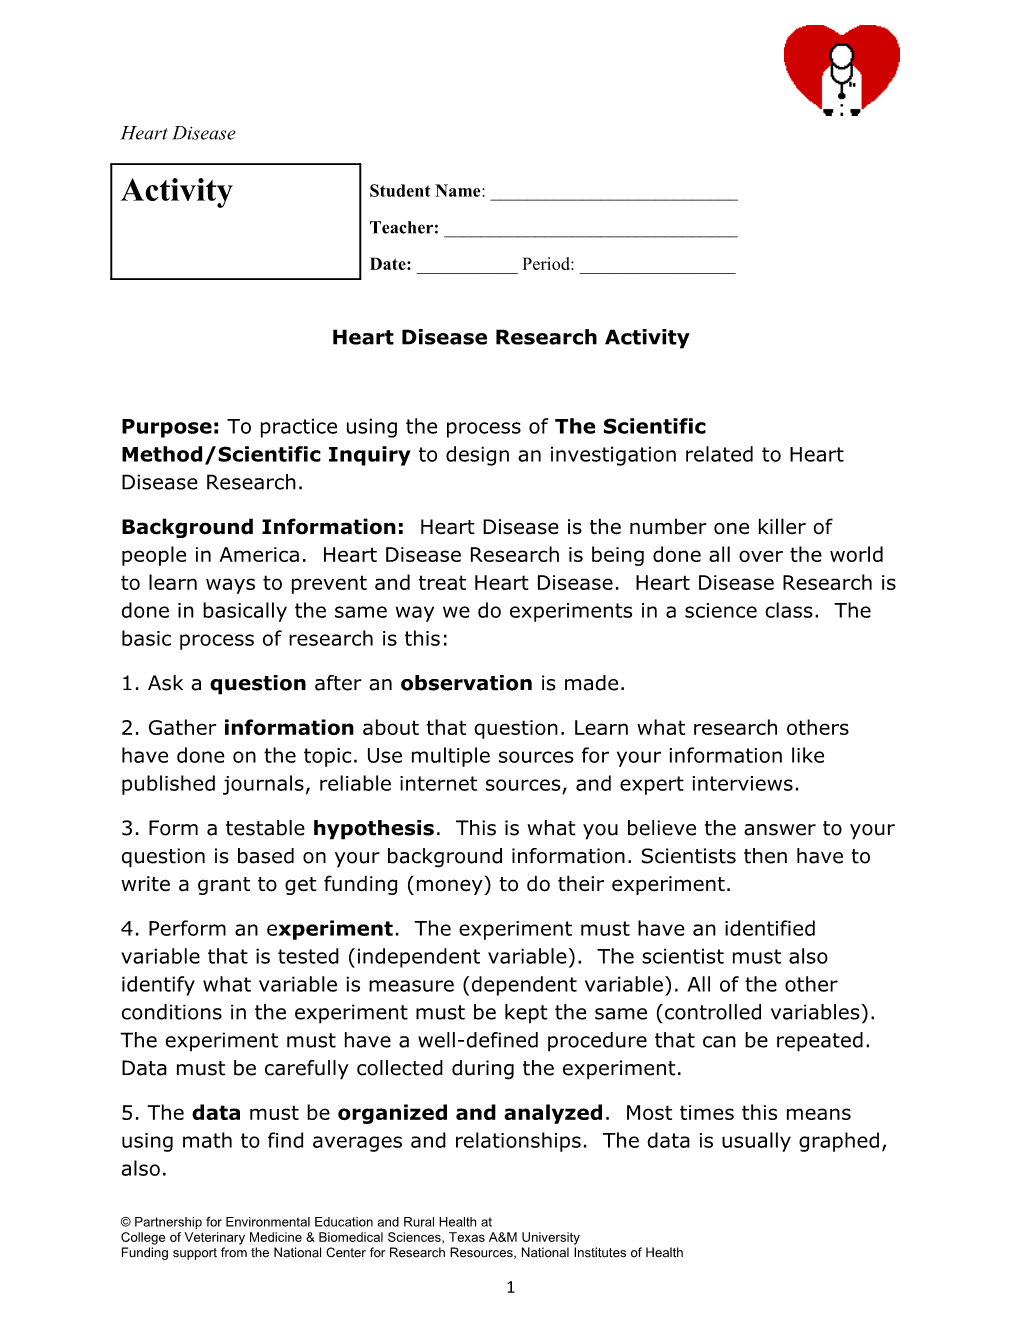 Heart Disease Research Activity